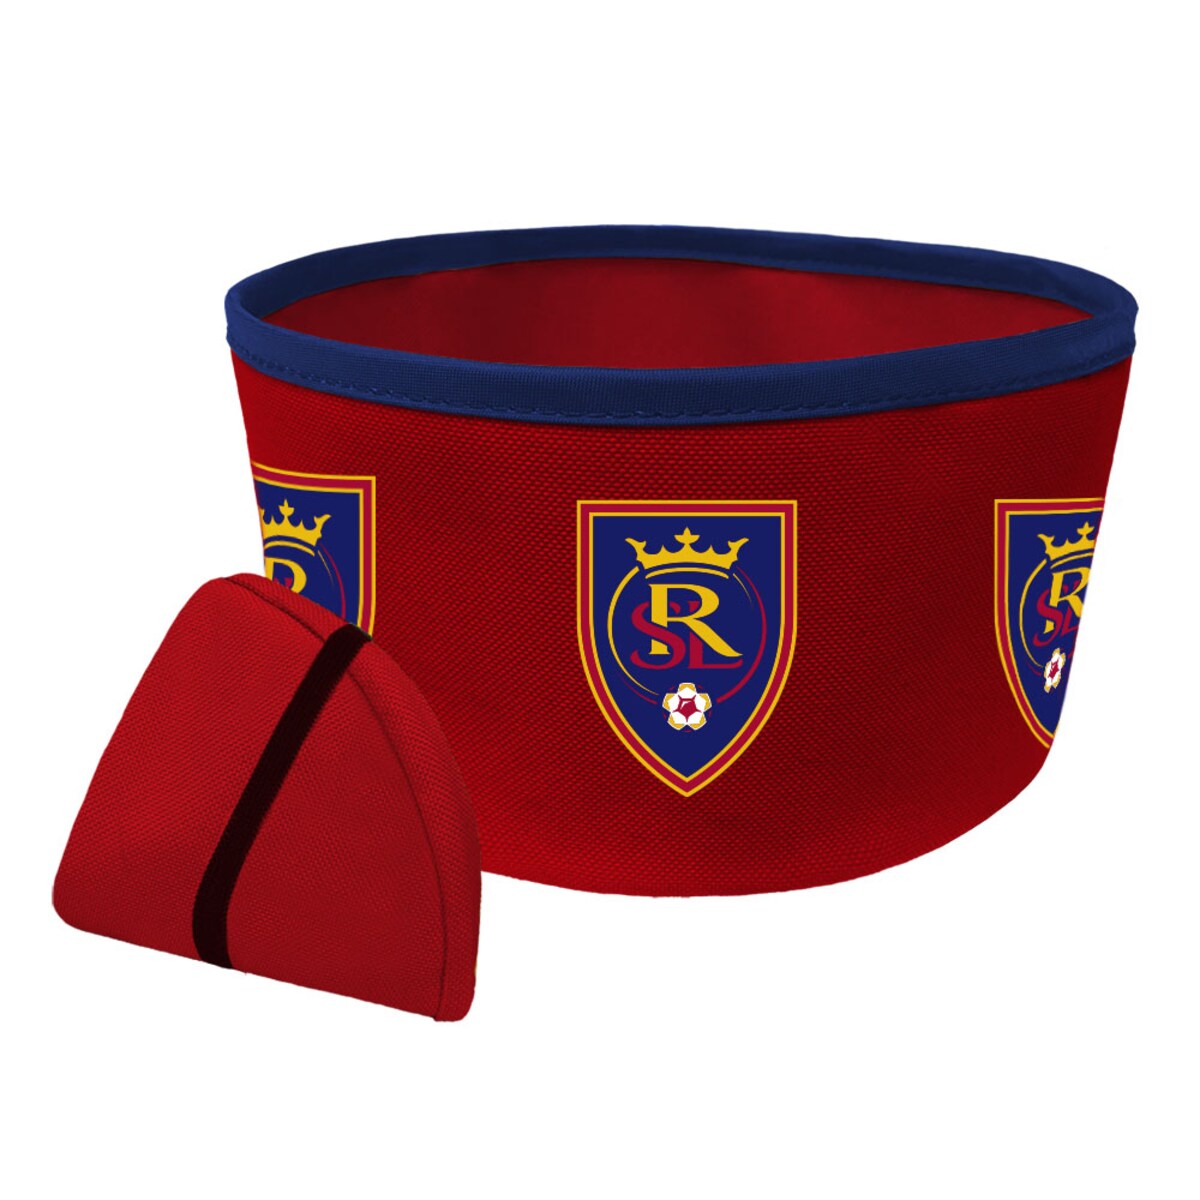 MLS \gCN ybgpi All Star Dogs lCr[ (ASD S21 Travel Collapsible Bowl)